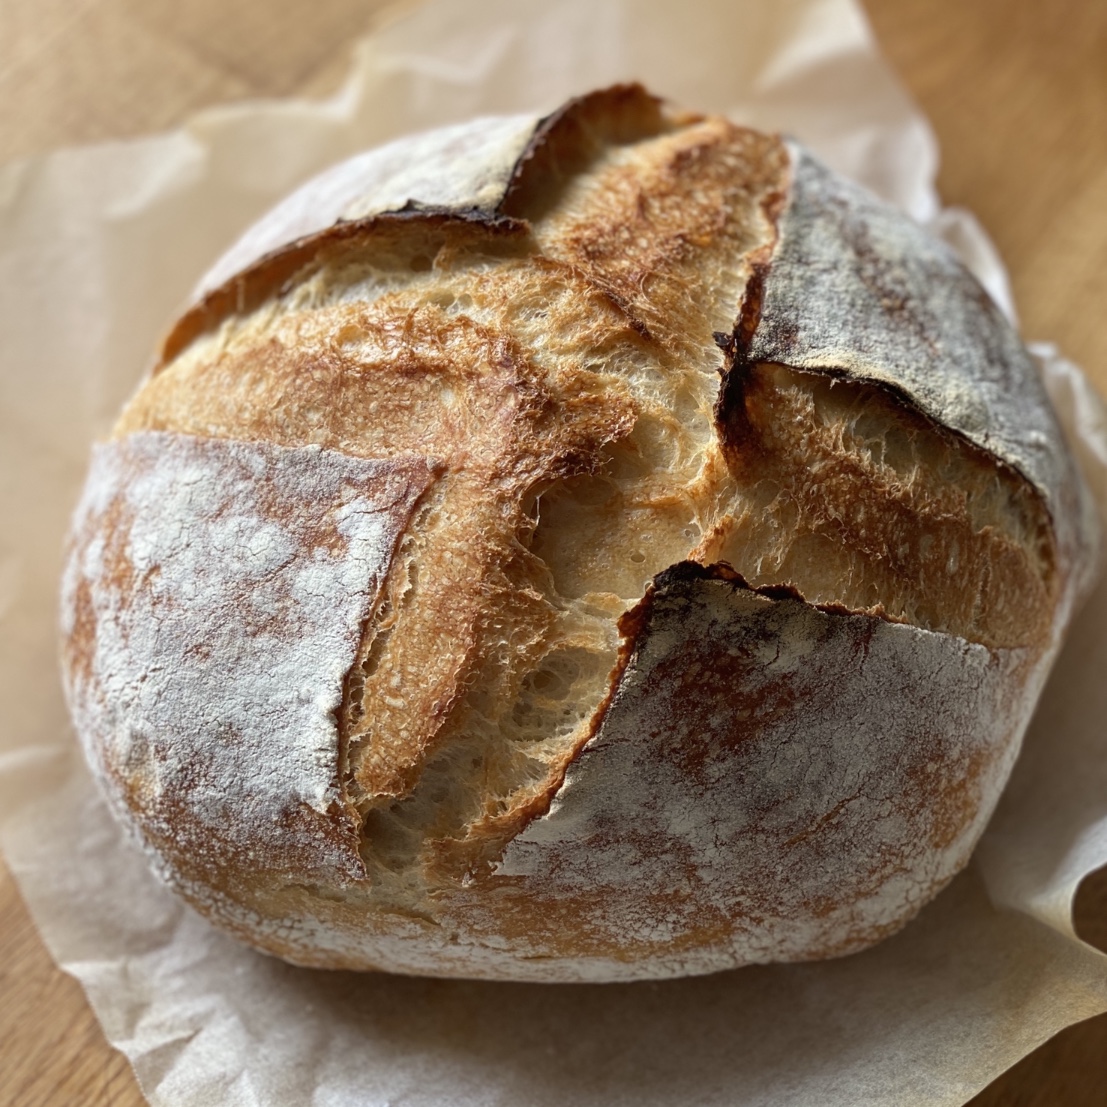 Get started: How to make a loaf of sourdough